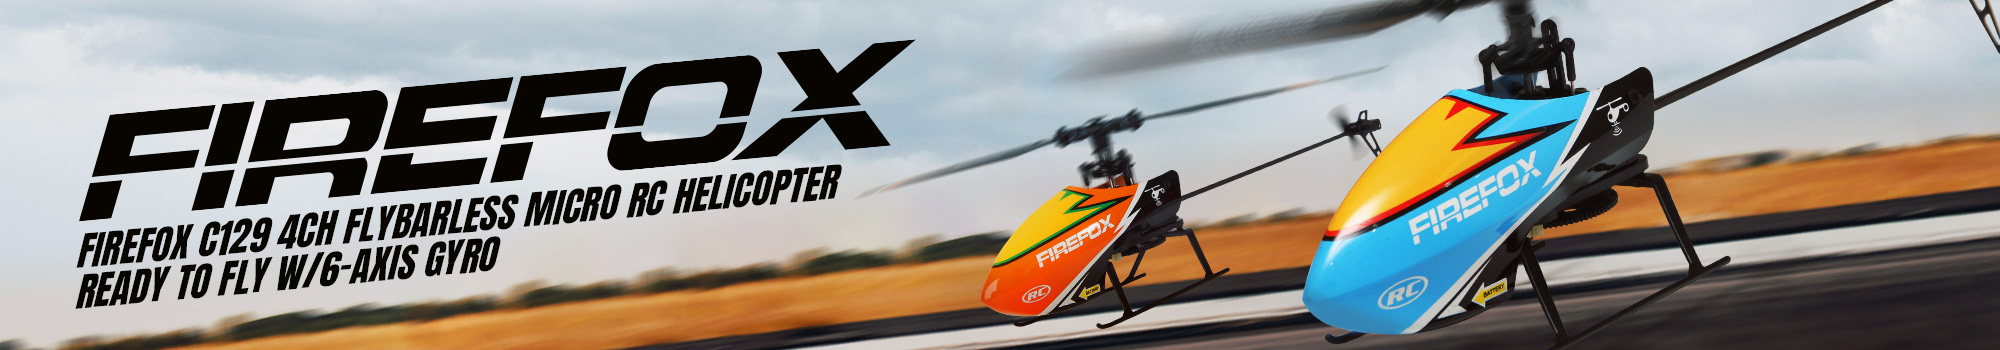 Firefox C129 4CH Flybarless Micro RC Helicopter